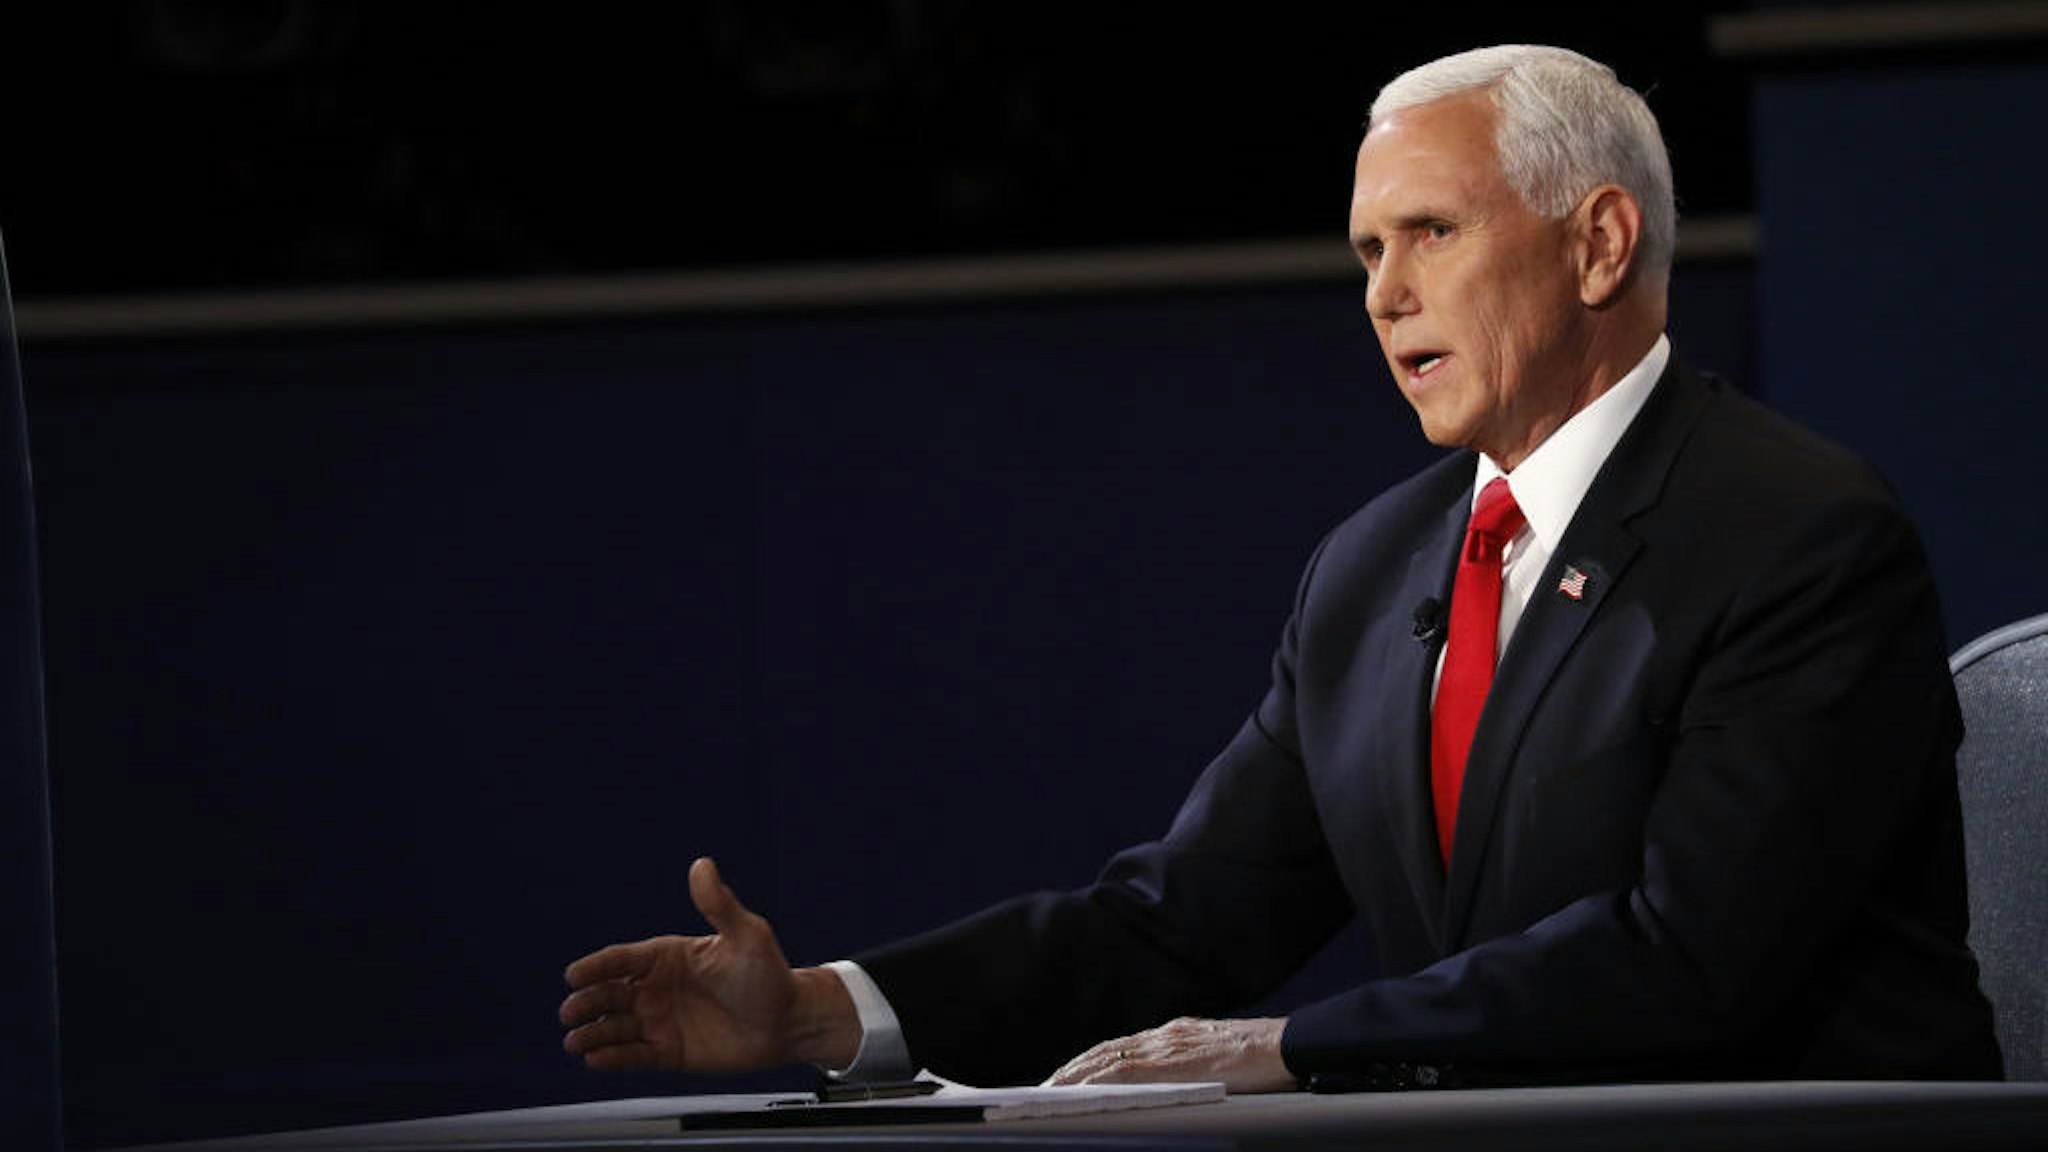 U.S. Vice President Mike Pence speaks during the U.S. vice presidential debate at the University of Utah in Salt Lake City, Utah, U.S., on Wednesday, Oct. 7, 2020. Pence and Harris face off in their first and only debate less than a month before the election, with coronavirus adding a sudden twist to the event. Photographer: Kim Raff/Bloomberg